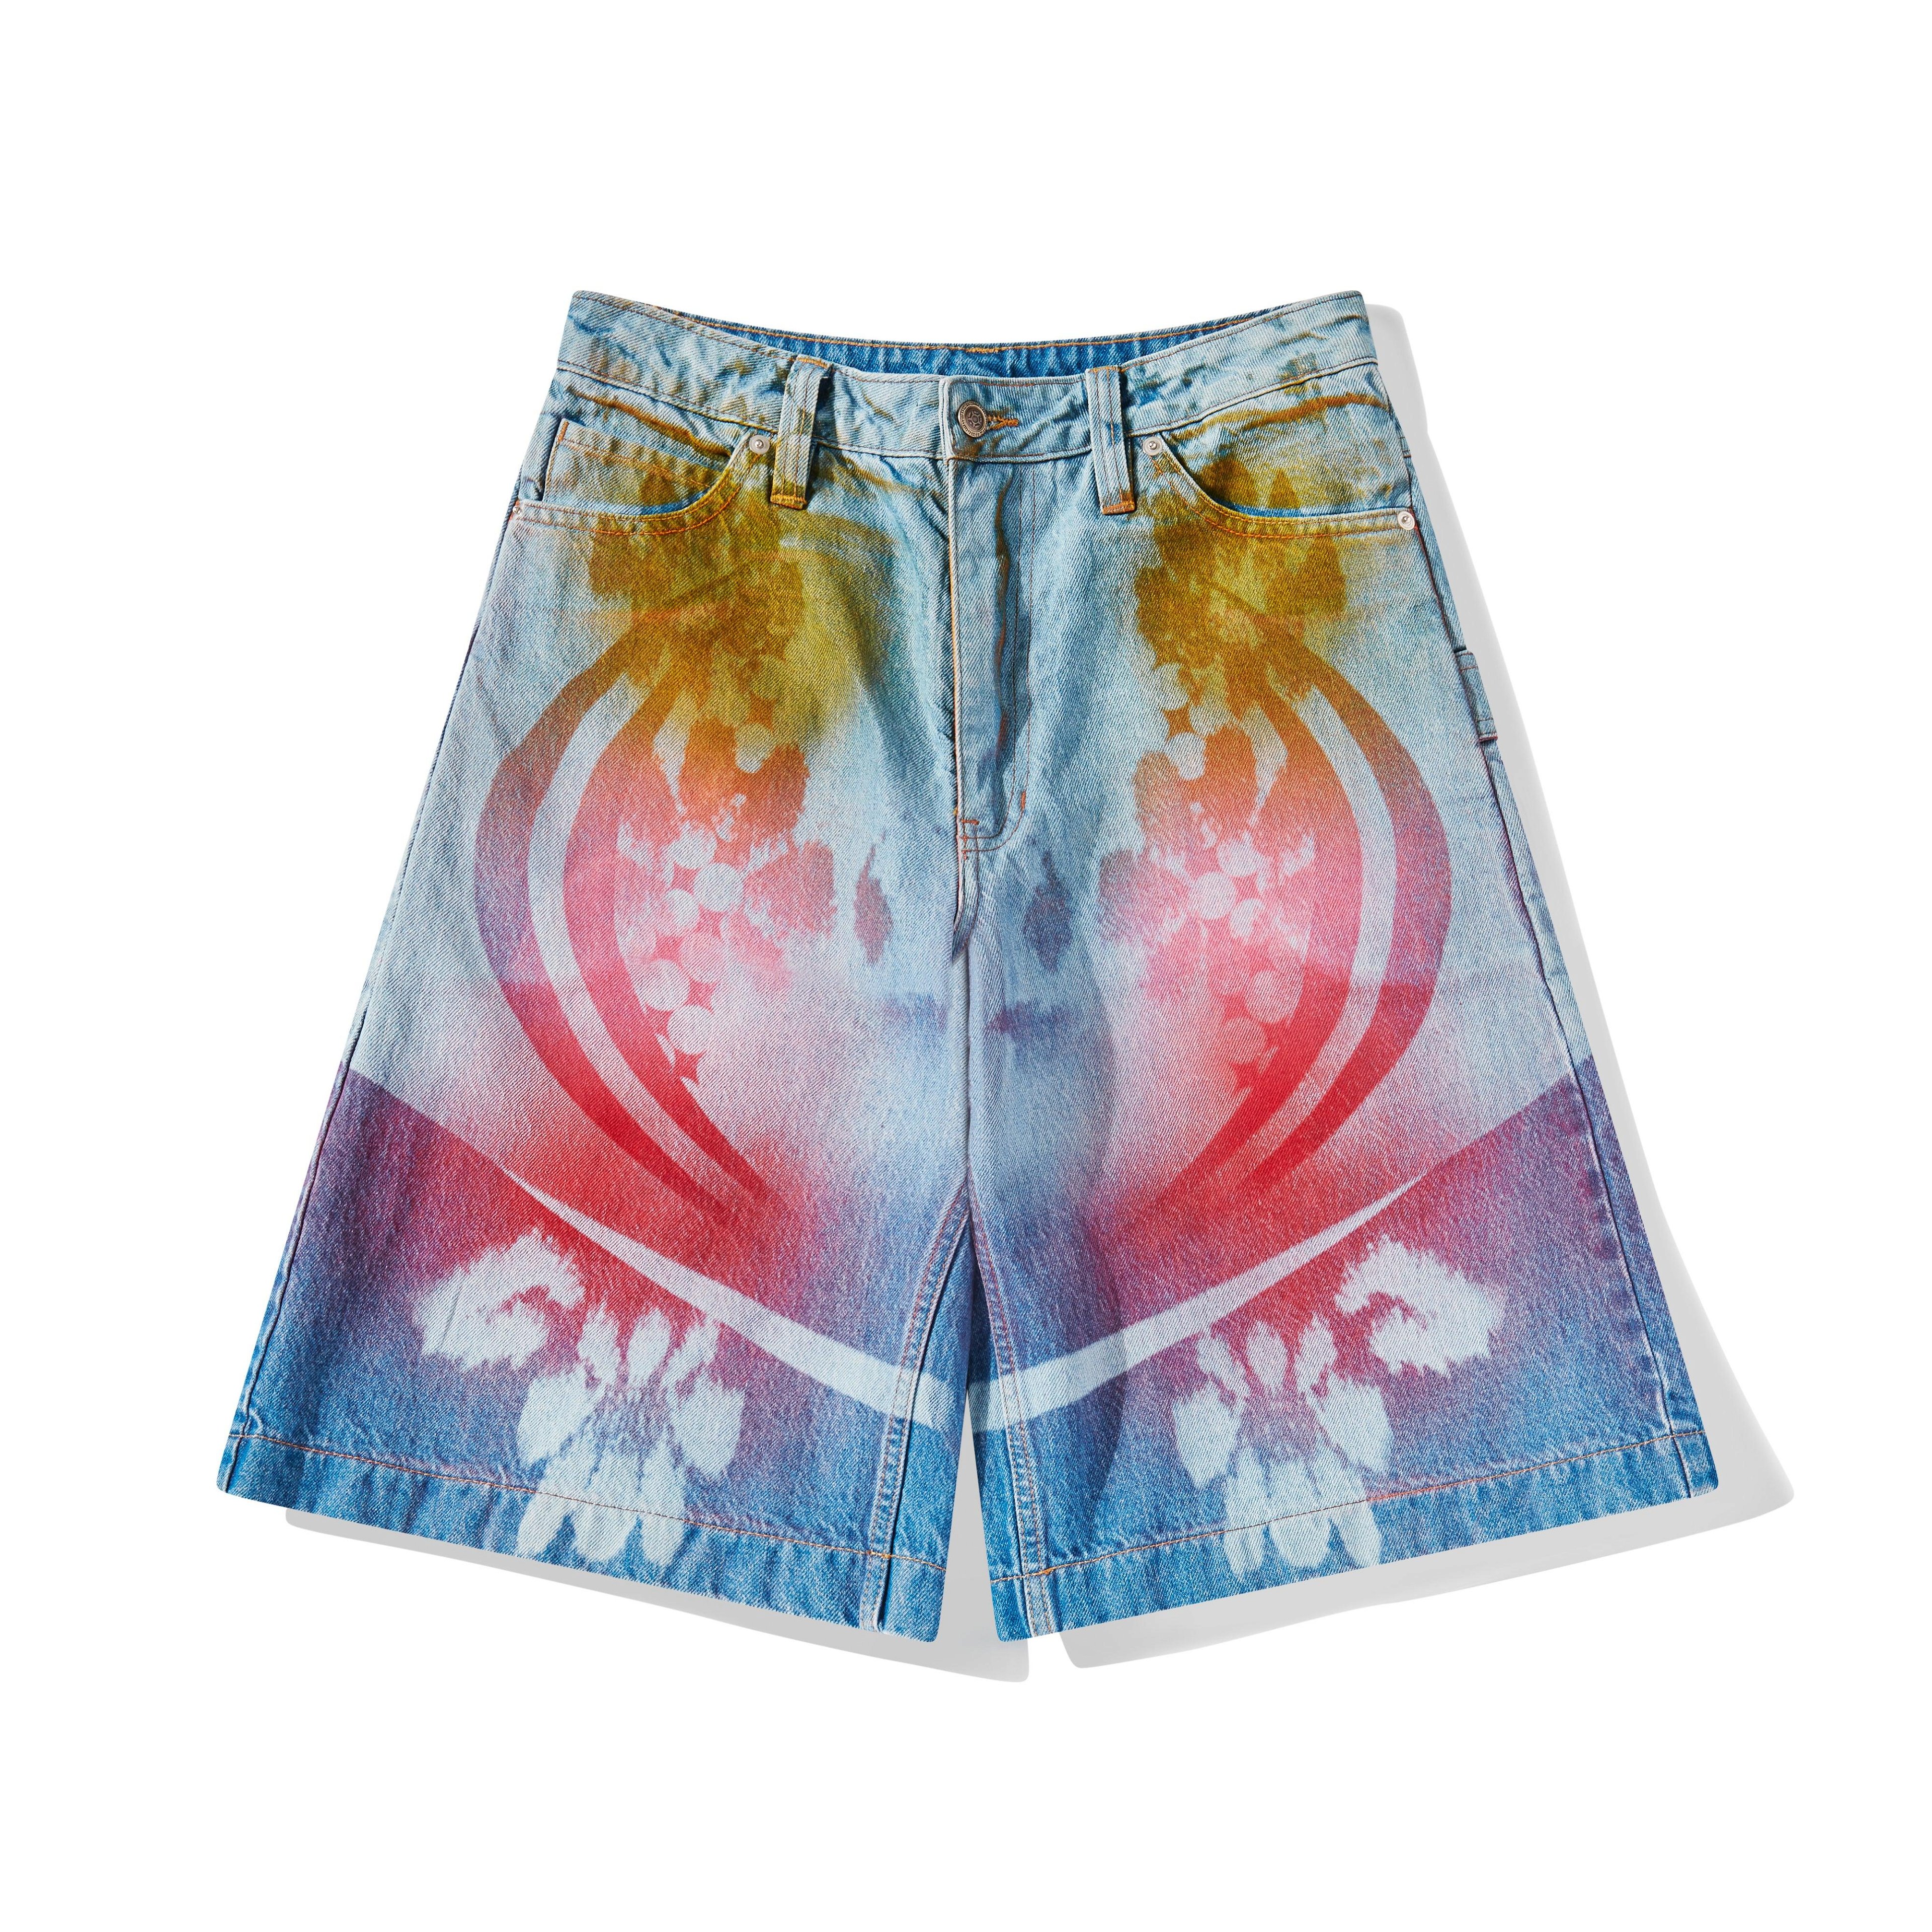 Paolina Russo - Women's Laser Etched Bermudas Shorts - (Blue Denim Rainbow) by PAOLINA RUSSO